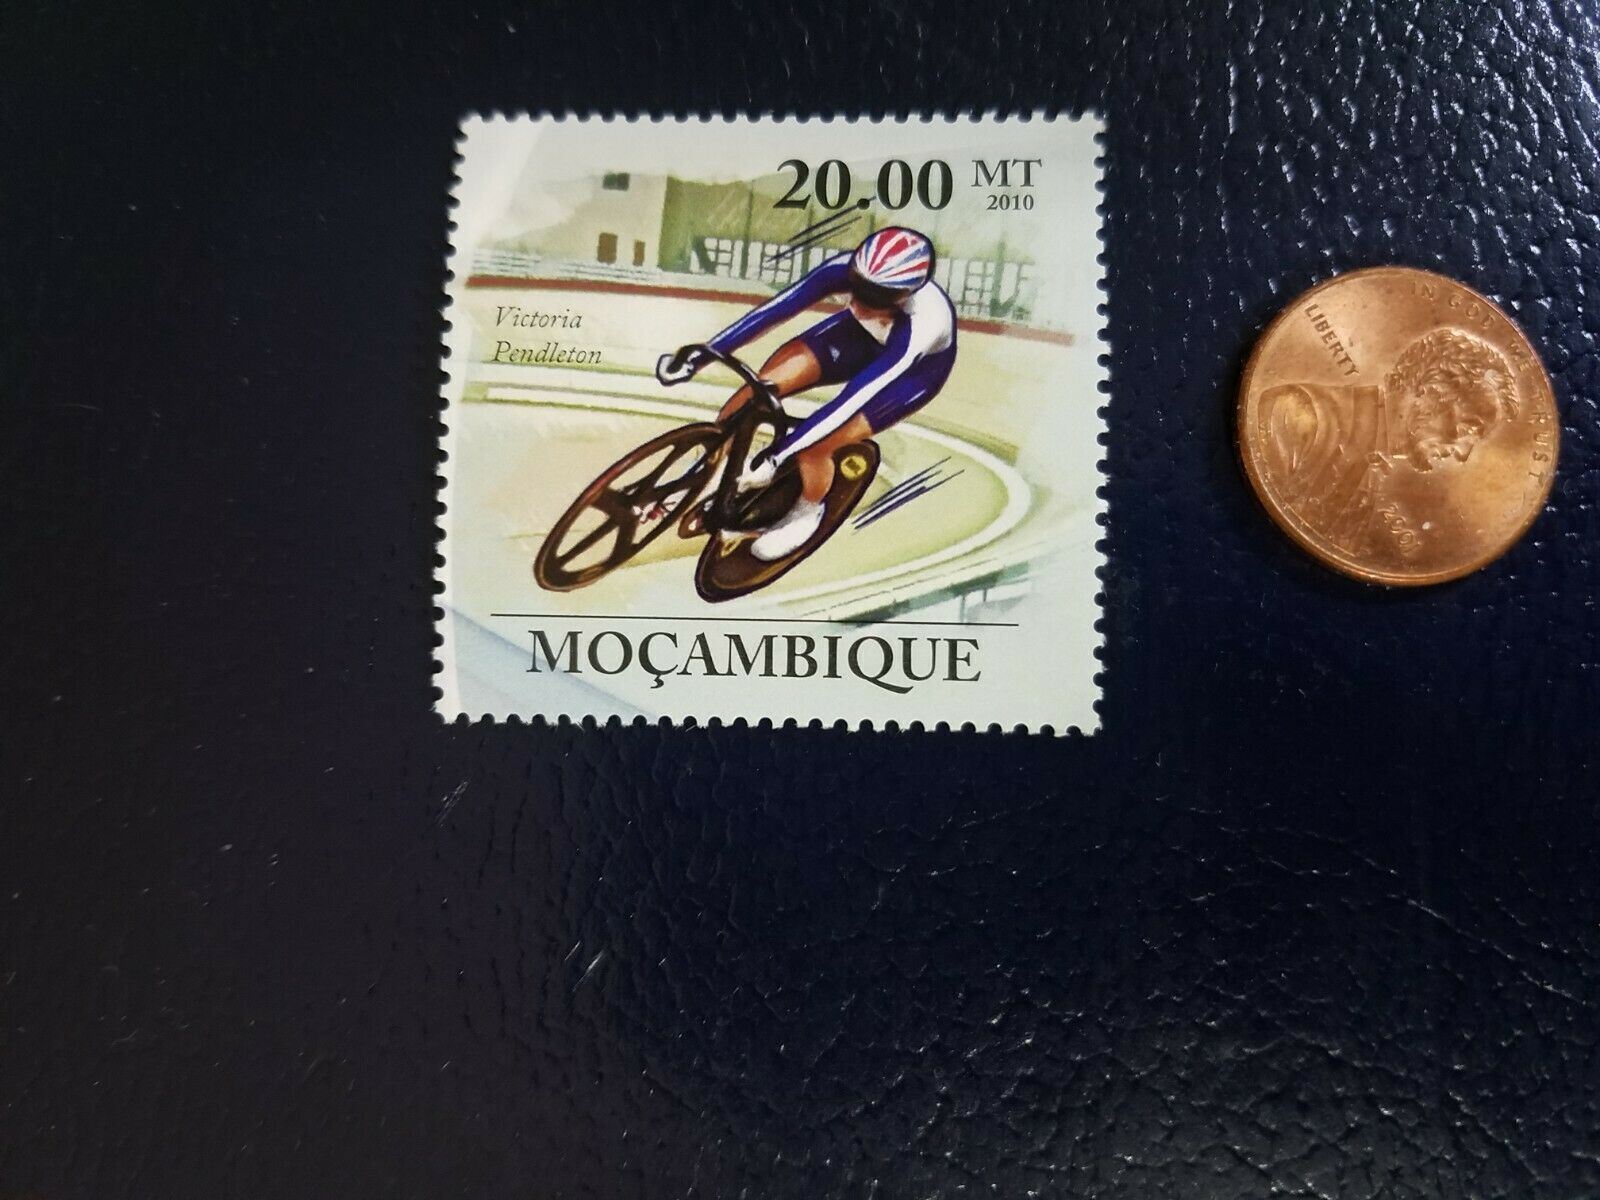 Victoria Pendleton Bicycler Cyclist 2010 Mocambique Perforated Stamp